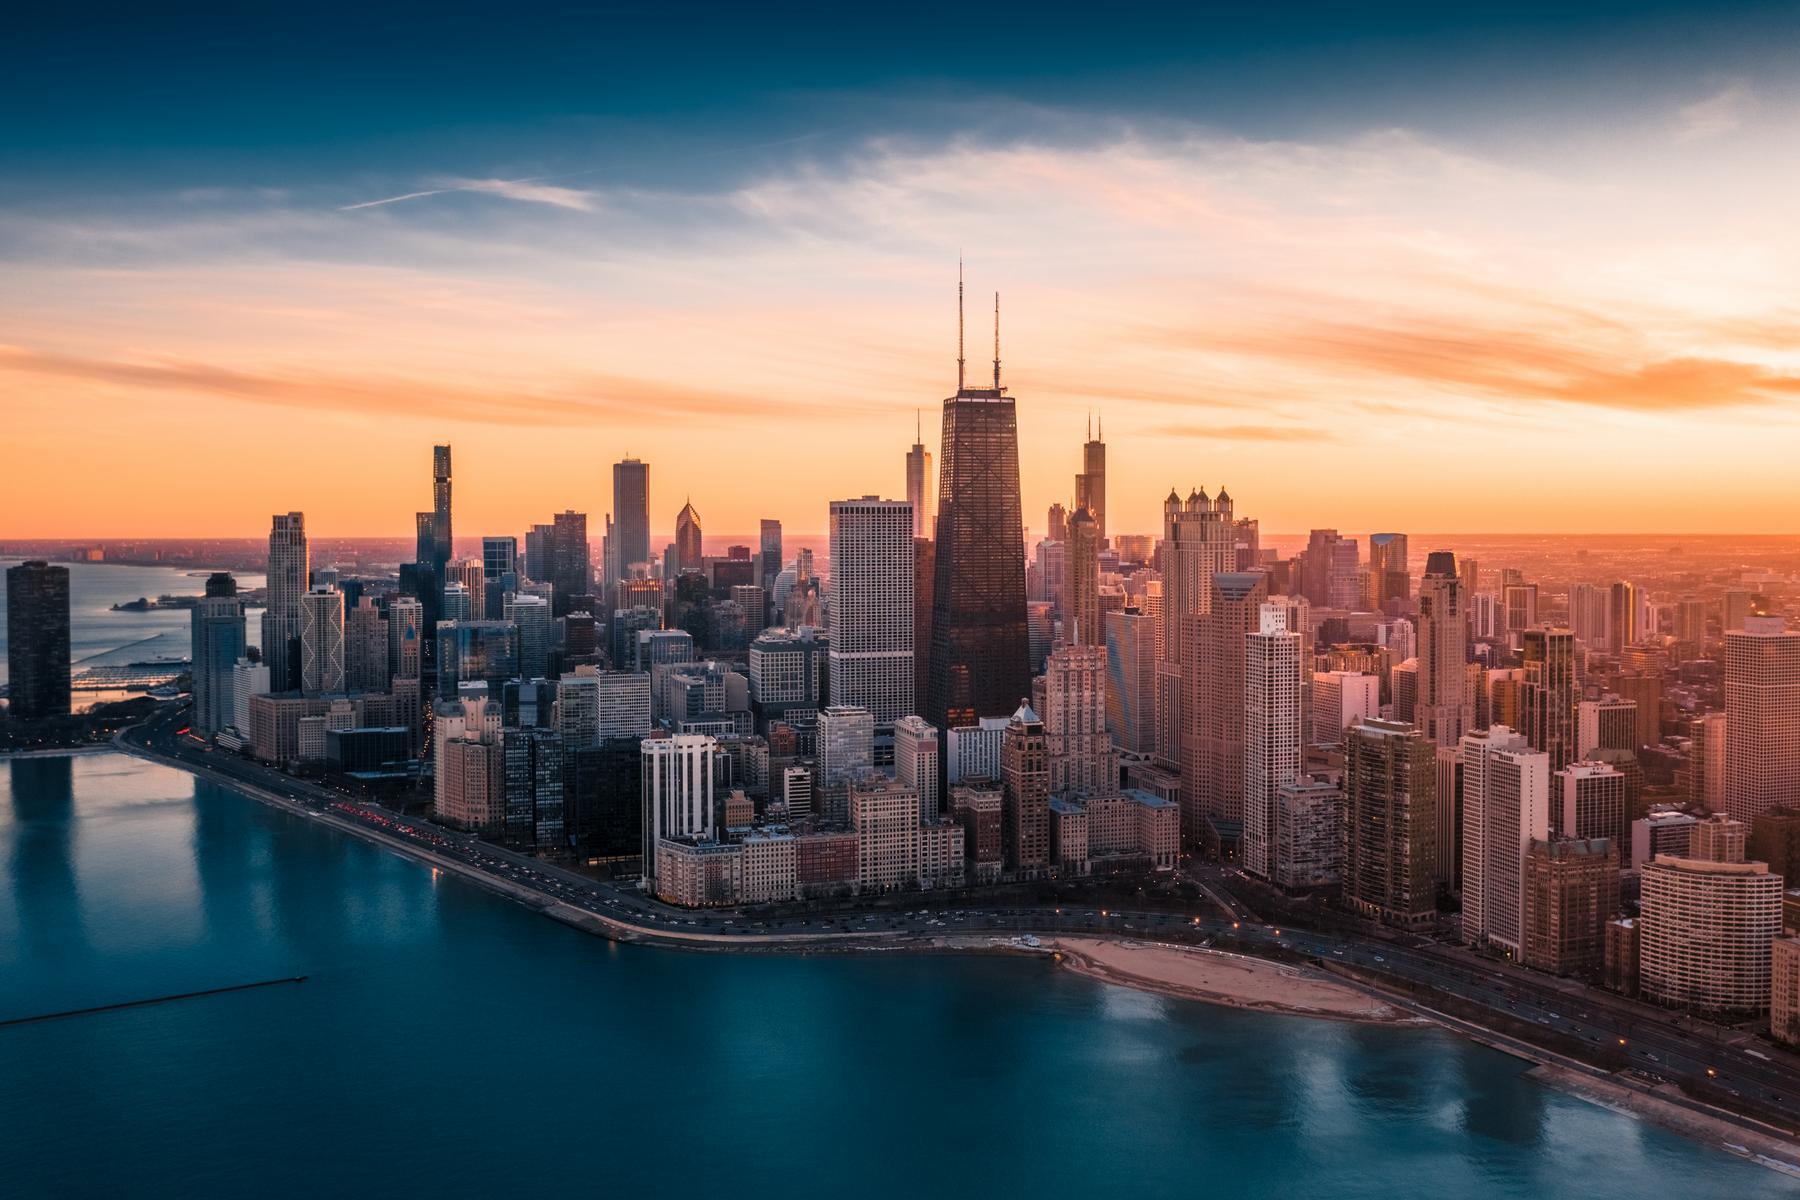 The Chicago skyline seen from above Lake Michigan at sunset